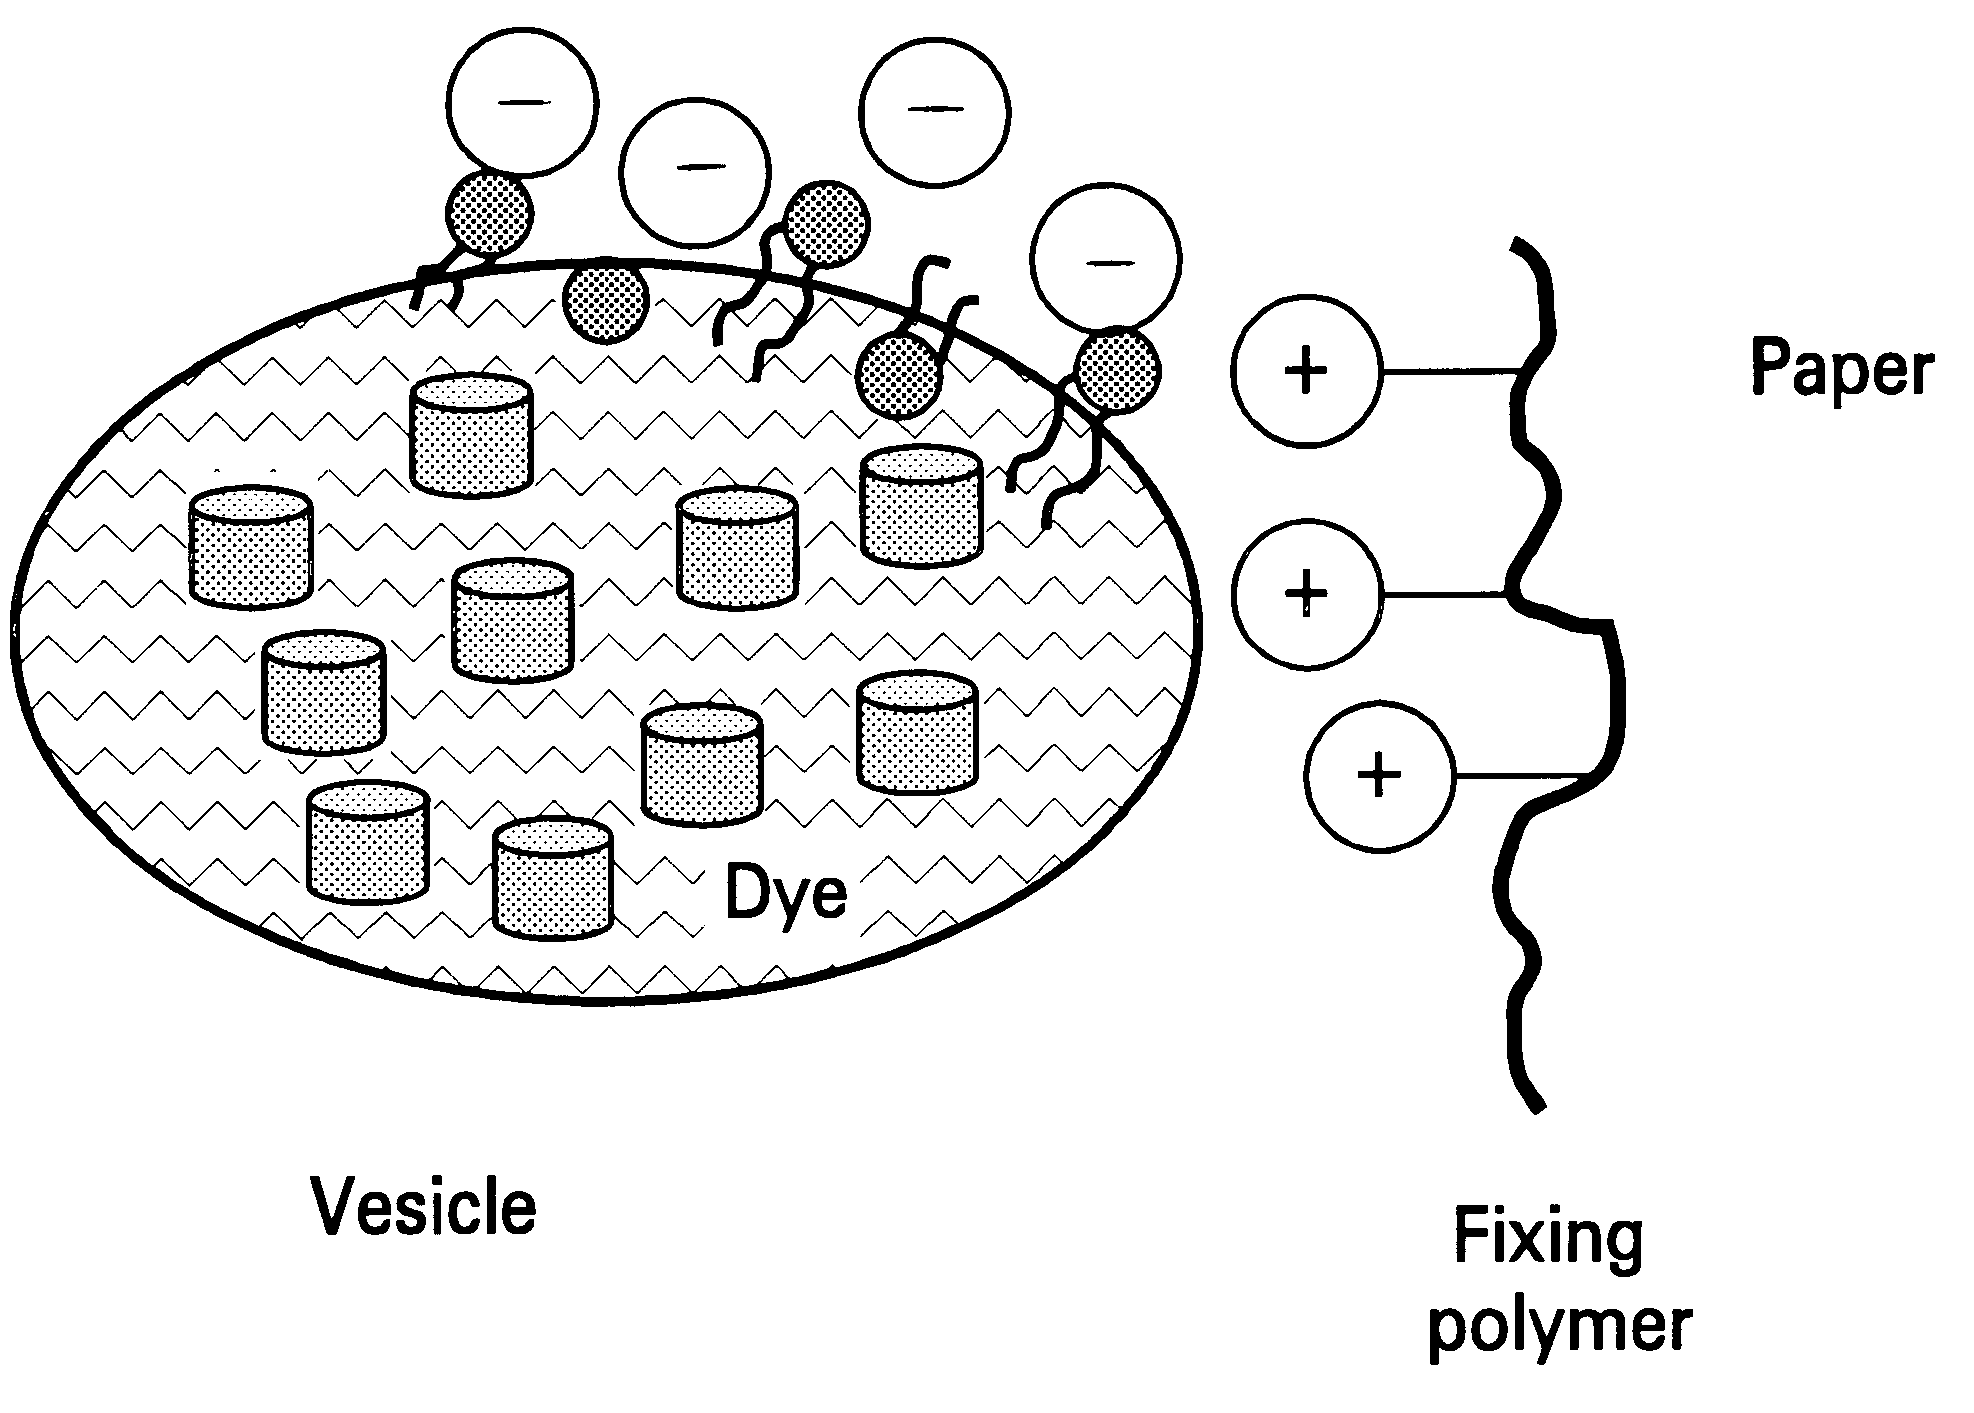 Increasing chroma and edge acuity of dye-based inks by underprinting using vesicle technique